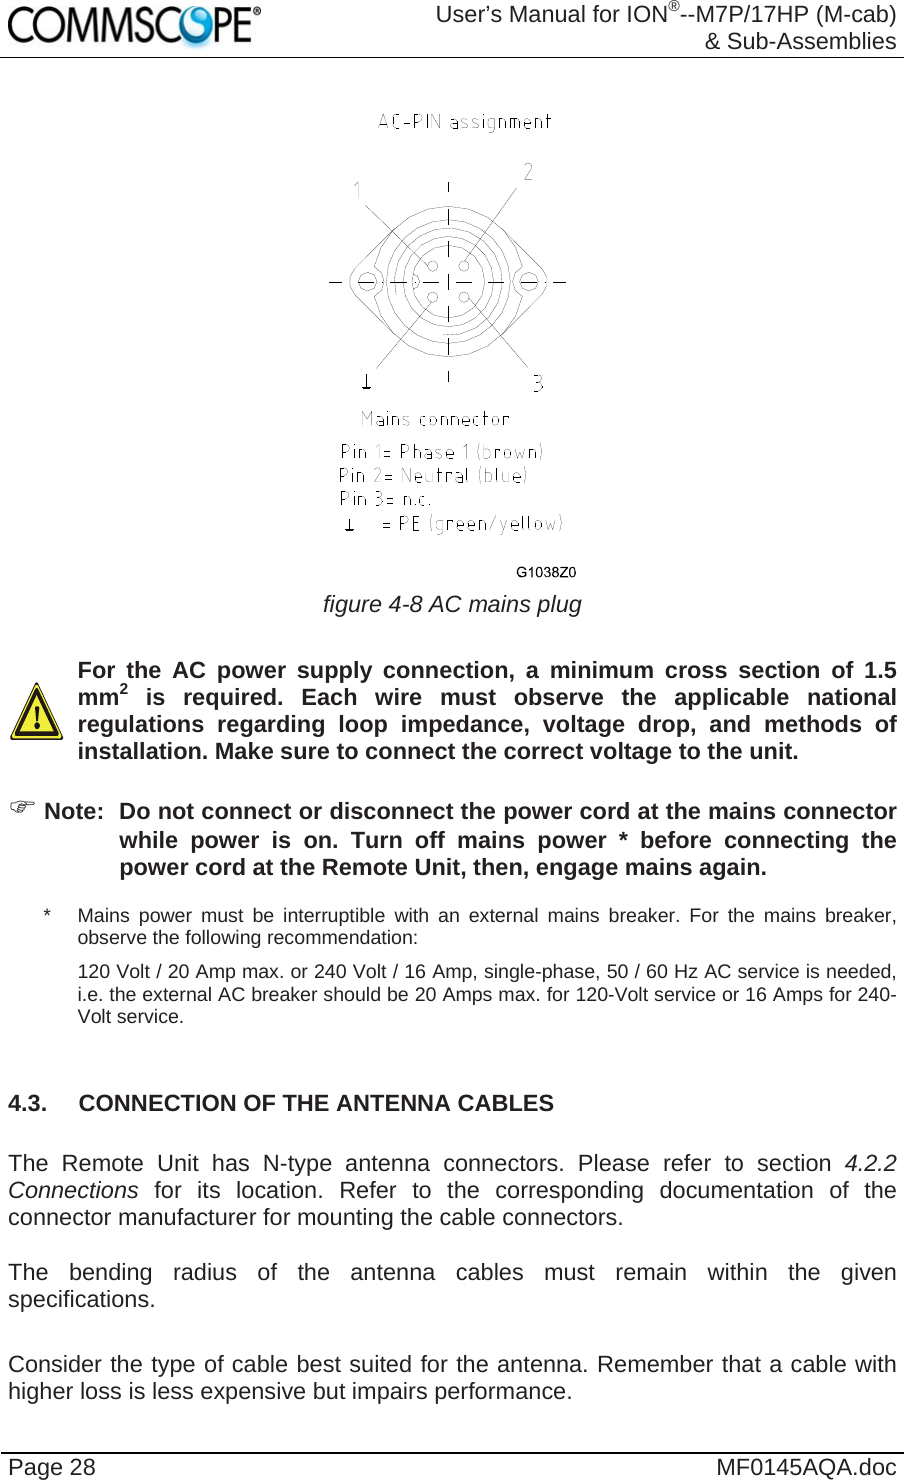  User’s Manual for ION®--M7P/17HP (M-cab) &amp; Sub-Assemblies Page 28  MF0145AQA.doc   figure 4-8 AC mains plug    For the AC power supply connection, a minimum cross section of 1.5 mm2 is required. Each wire must observe the applicable national regulations regarding loop impedance, voltage drop, and methods of installation. Make sure to connect the correct voltage to the unit.   Note:  Do not connect or disconnect the power cord at the mains connector while power is on. Turn off mains power * before connecting the power cord at the Remote Unit, then, engage mains again. *   Mains power must be interruptible with an external mains breaker. For the mains breaker, observe the following recommendation: 120 Volt / 20 Amp max. or 240 Volt / 16 Amp, single-phase, 50 / 60 Hz AC service is needed, i.e. the external AC breaker should be 20 Amps max. for 120-Volt service or 16 Amps for 240-Volt service.  4.3.  CONNECTION OF THE ANTENNA CABLES  The Remote Unit has N-type antenna connectors. Please refer to section 4.2.2 Connections  for its location. Refer to the corresponding documentation of the connector manufacturer for mounting the cable connectors.   The bending radius of the antenna cables must remain within the given specifications.   Consider the type of cable best suited for the antenna. Remember that a cable with higher loss is less expensive but impairs performance. 